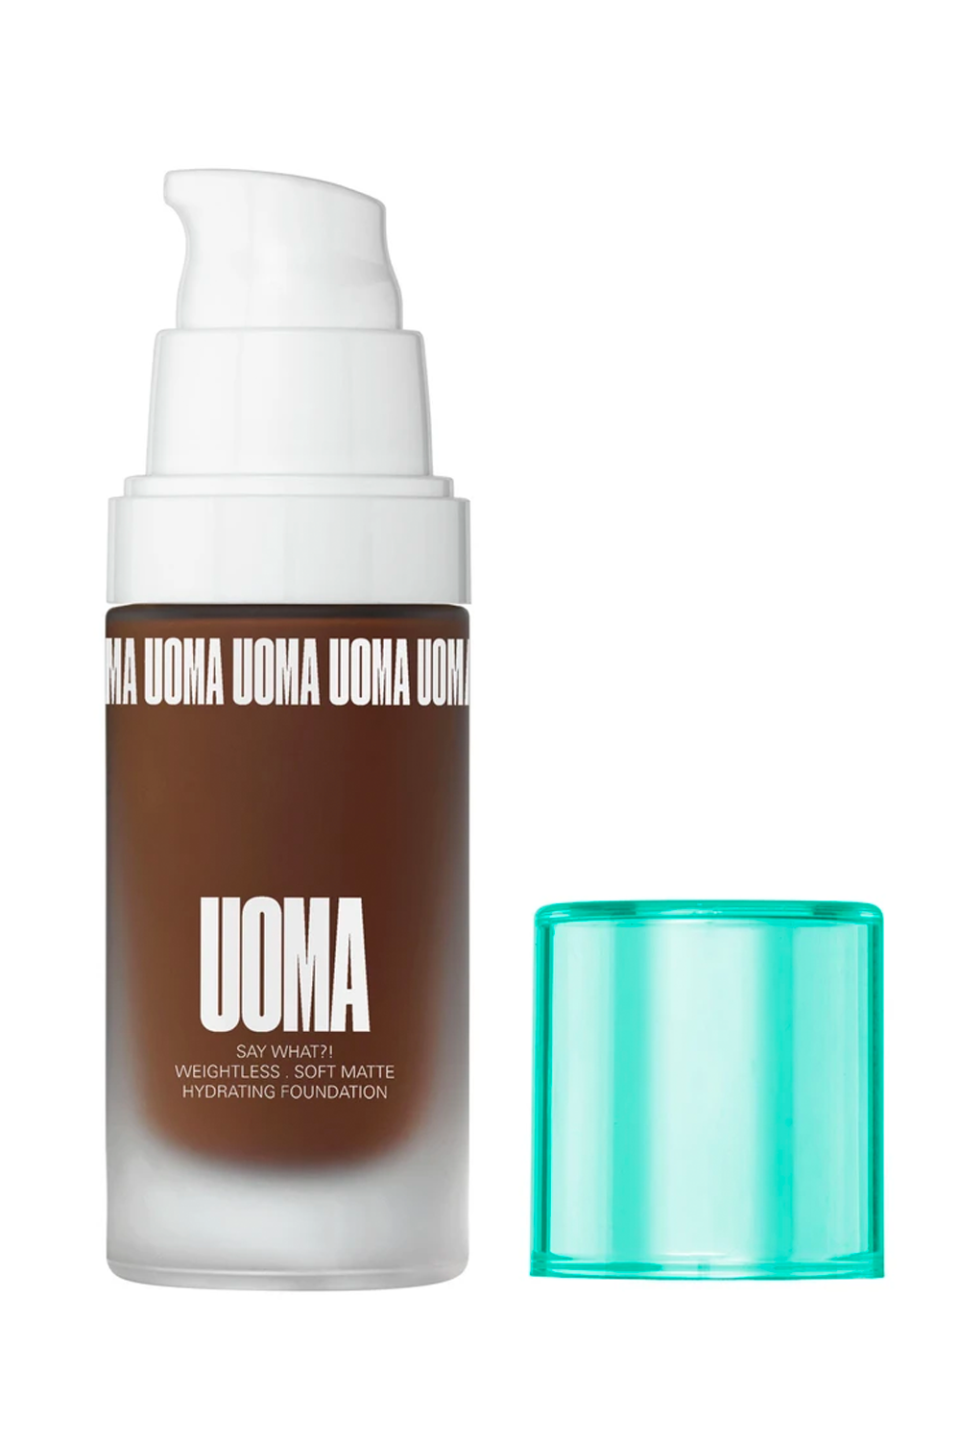 2) Uoma Beauty Say What Soft Matte Foundation